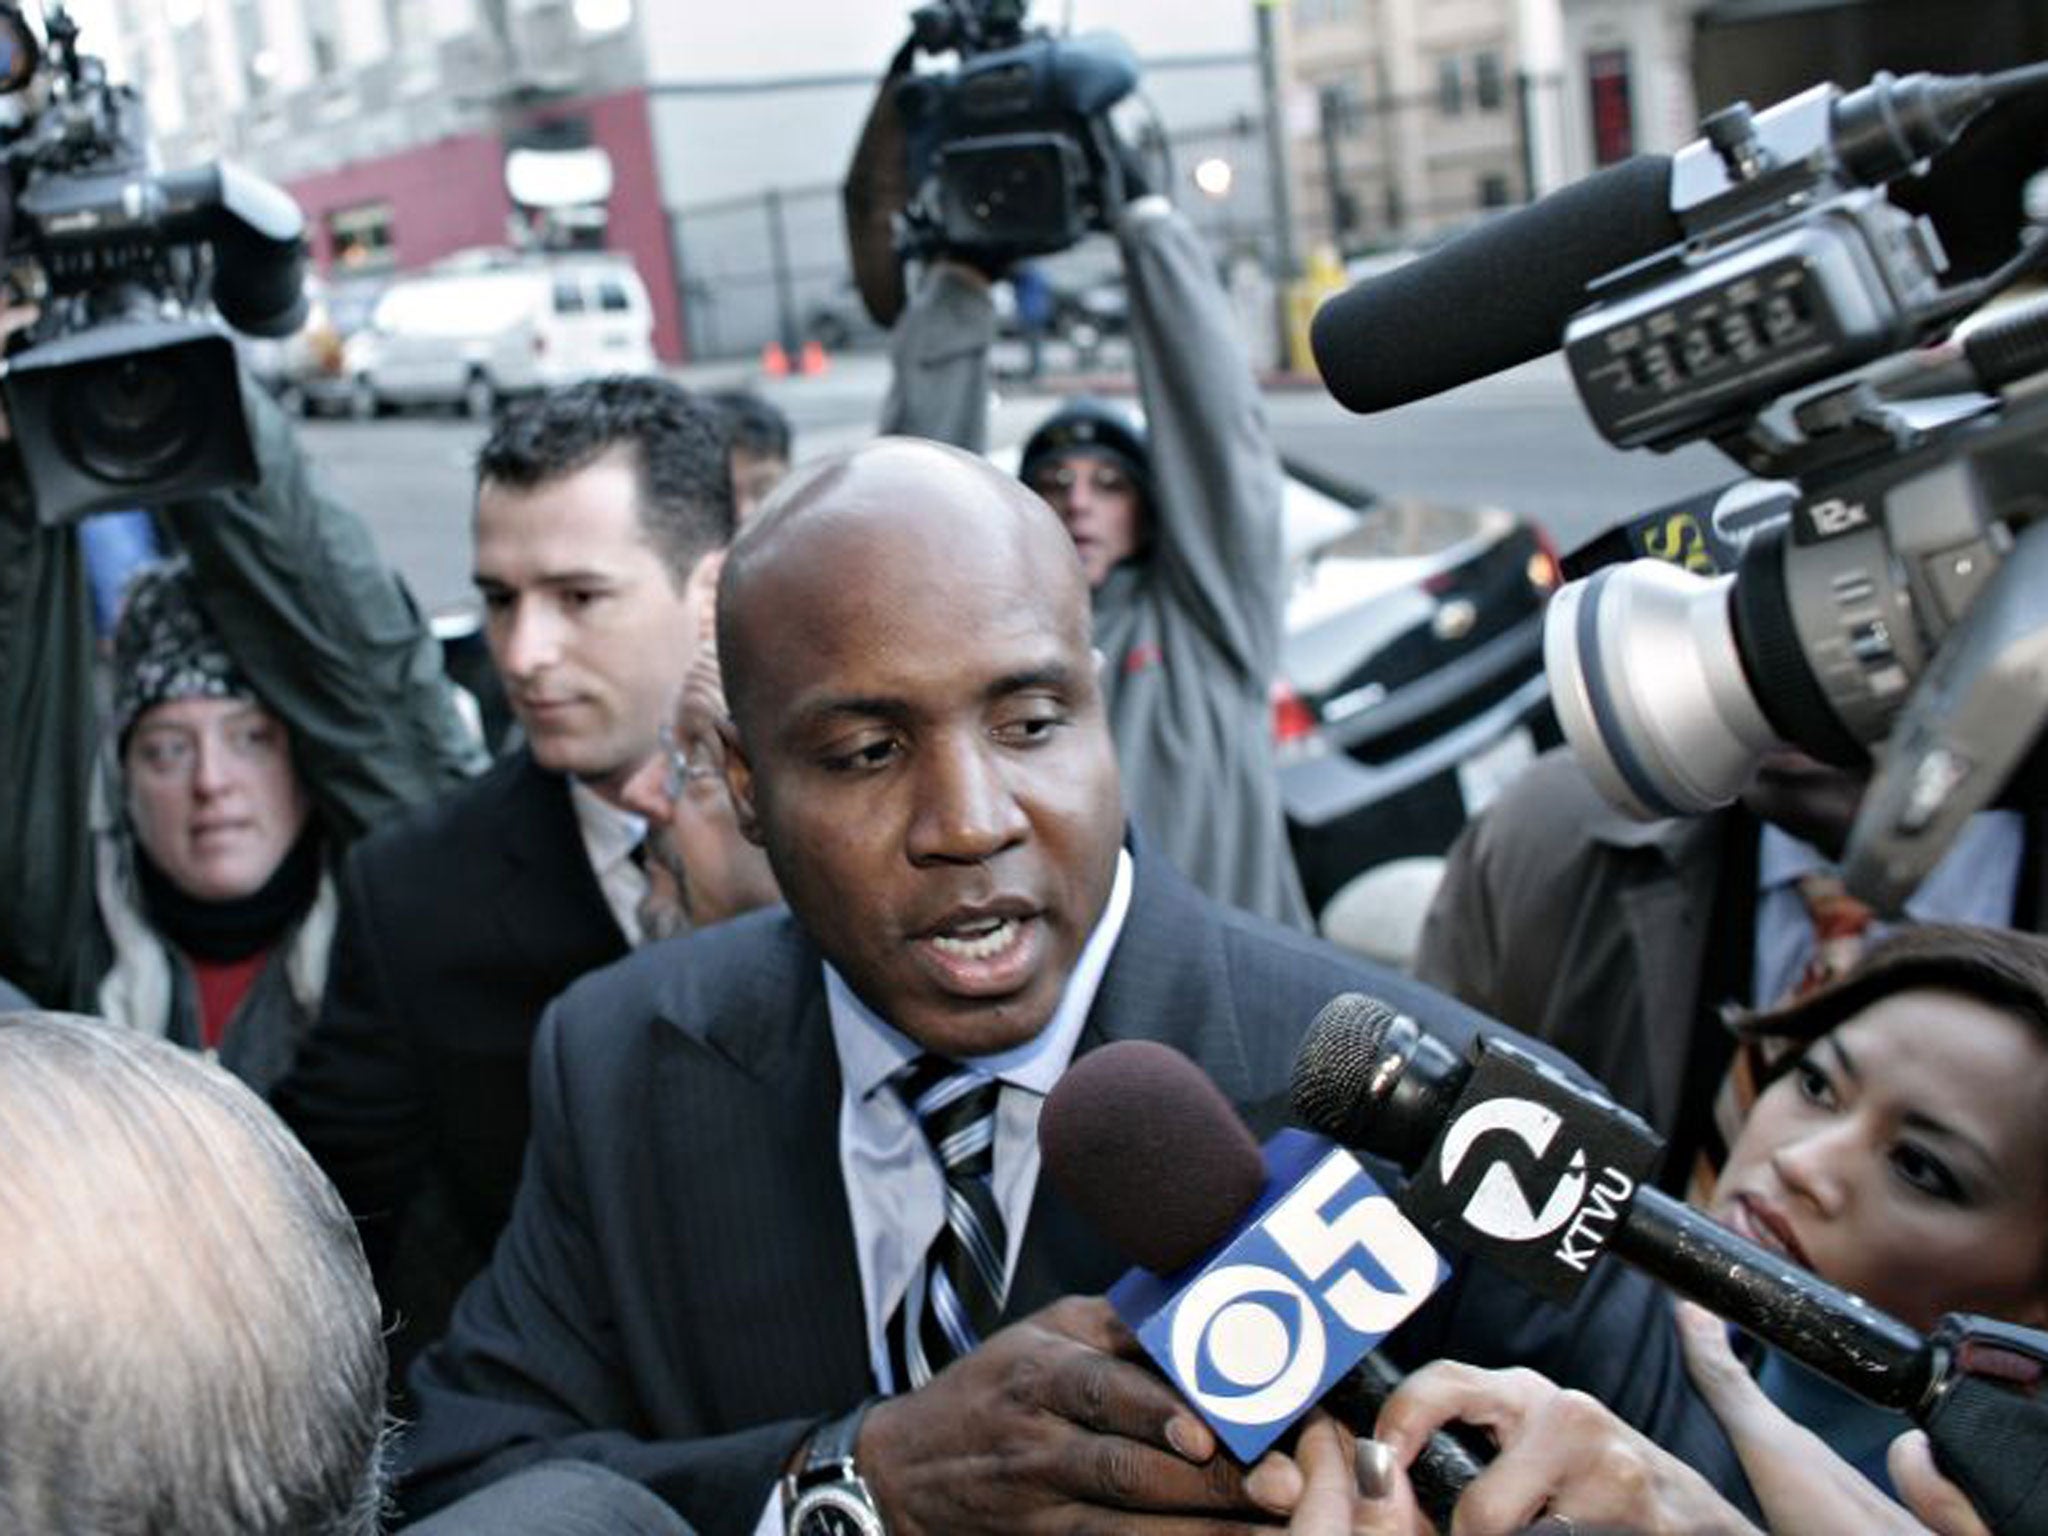 Barry Bonds has been blackballed from baseball’s Hall of Fame